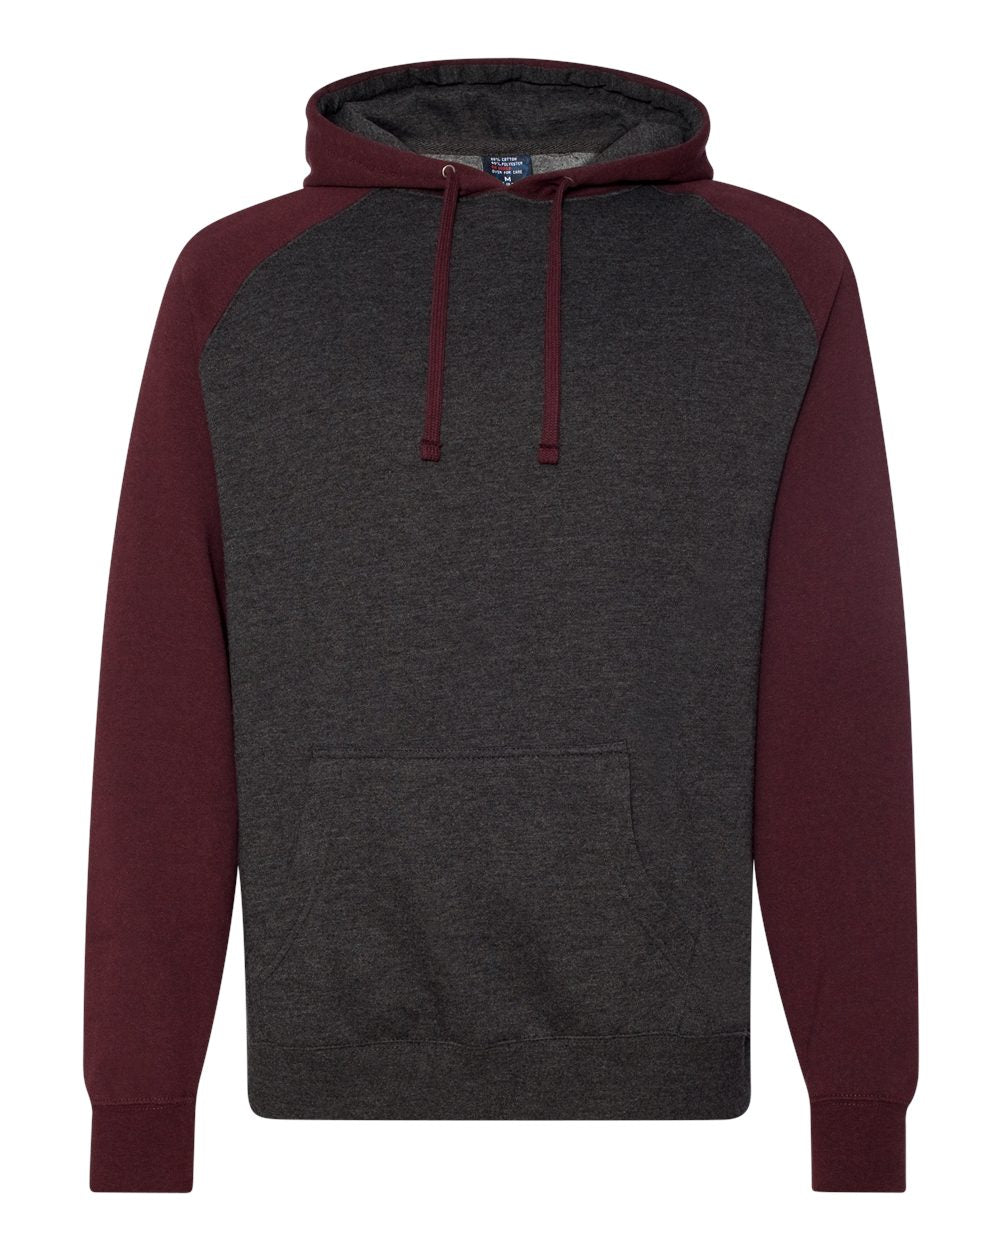 Independent Trading Co. Raglan Hooded Sweatshirt IND40RP #color_Charcoal Heather/ Burgundy Heather